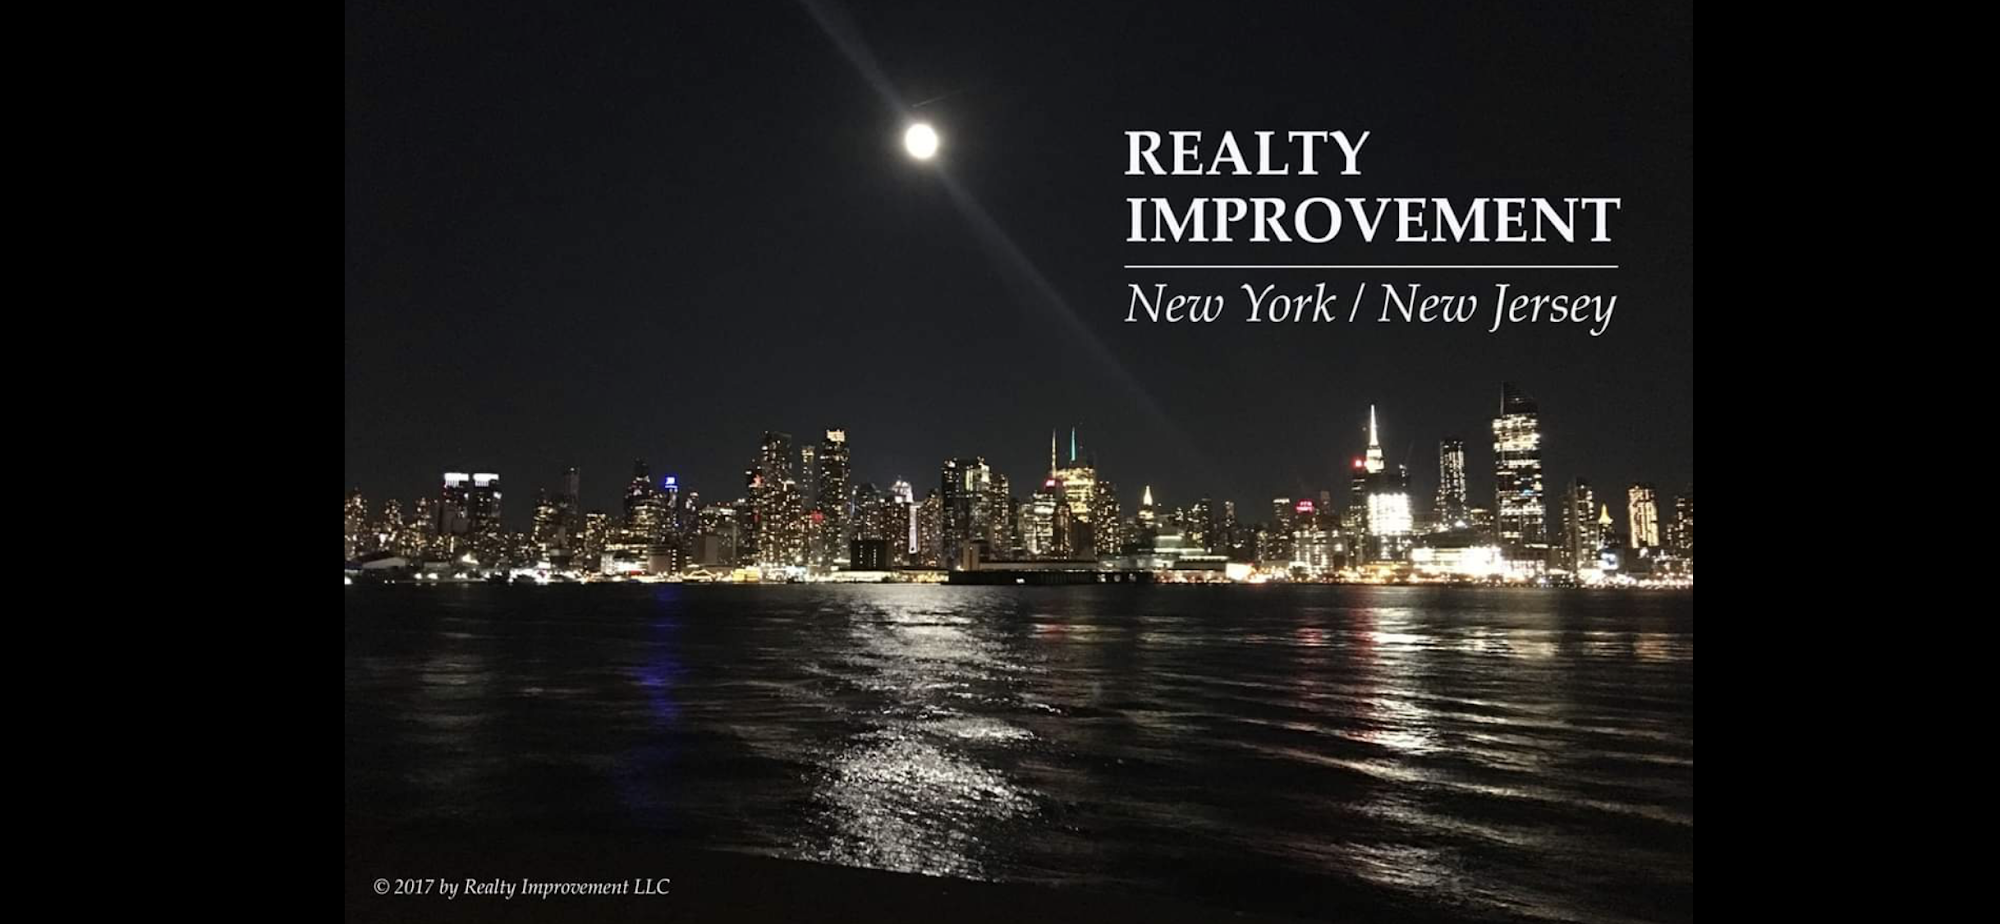 Realty Improvement LLC: General Contractor, Kitchen Remodeling, Home Renovation Company Bergen County and New Jersey